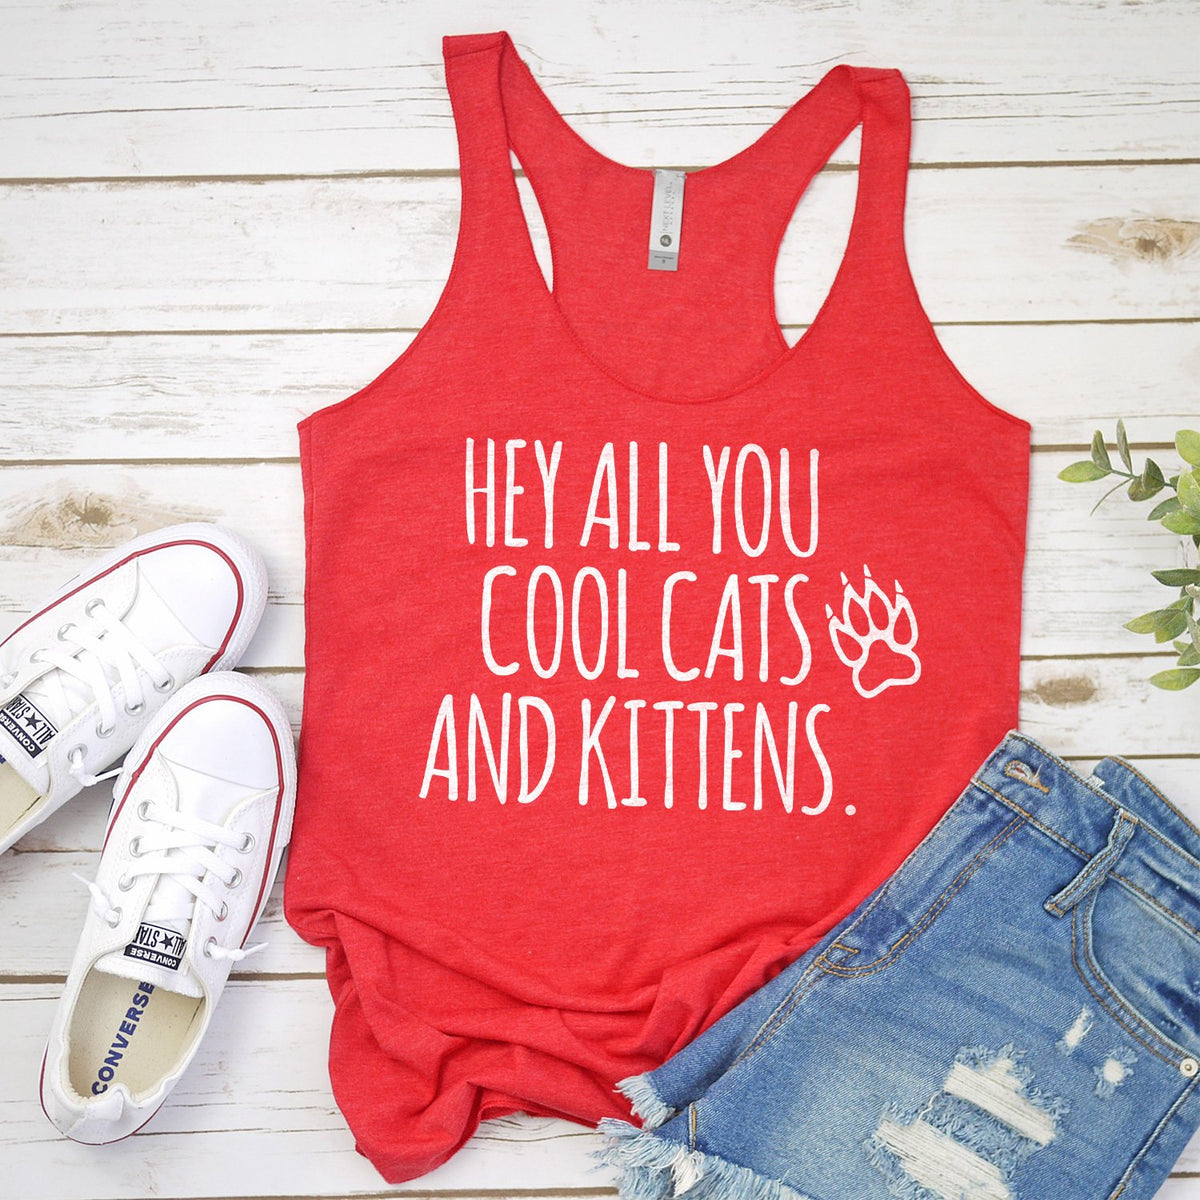 Hey All You Cool Cats and Kittens - Tank Top Racerback